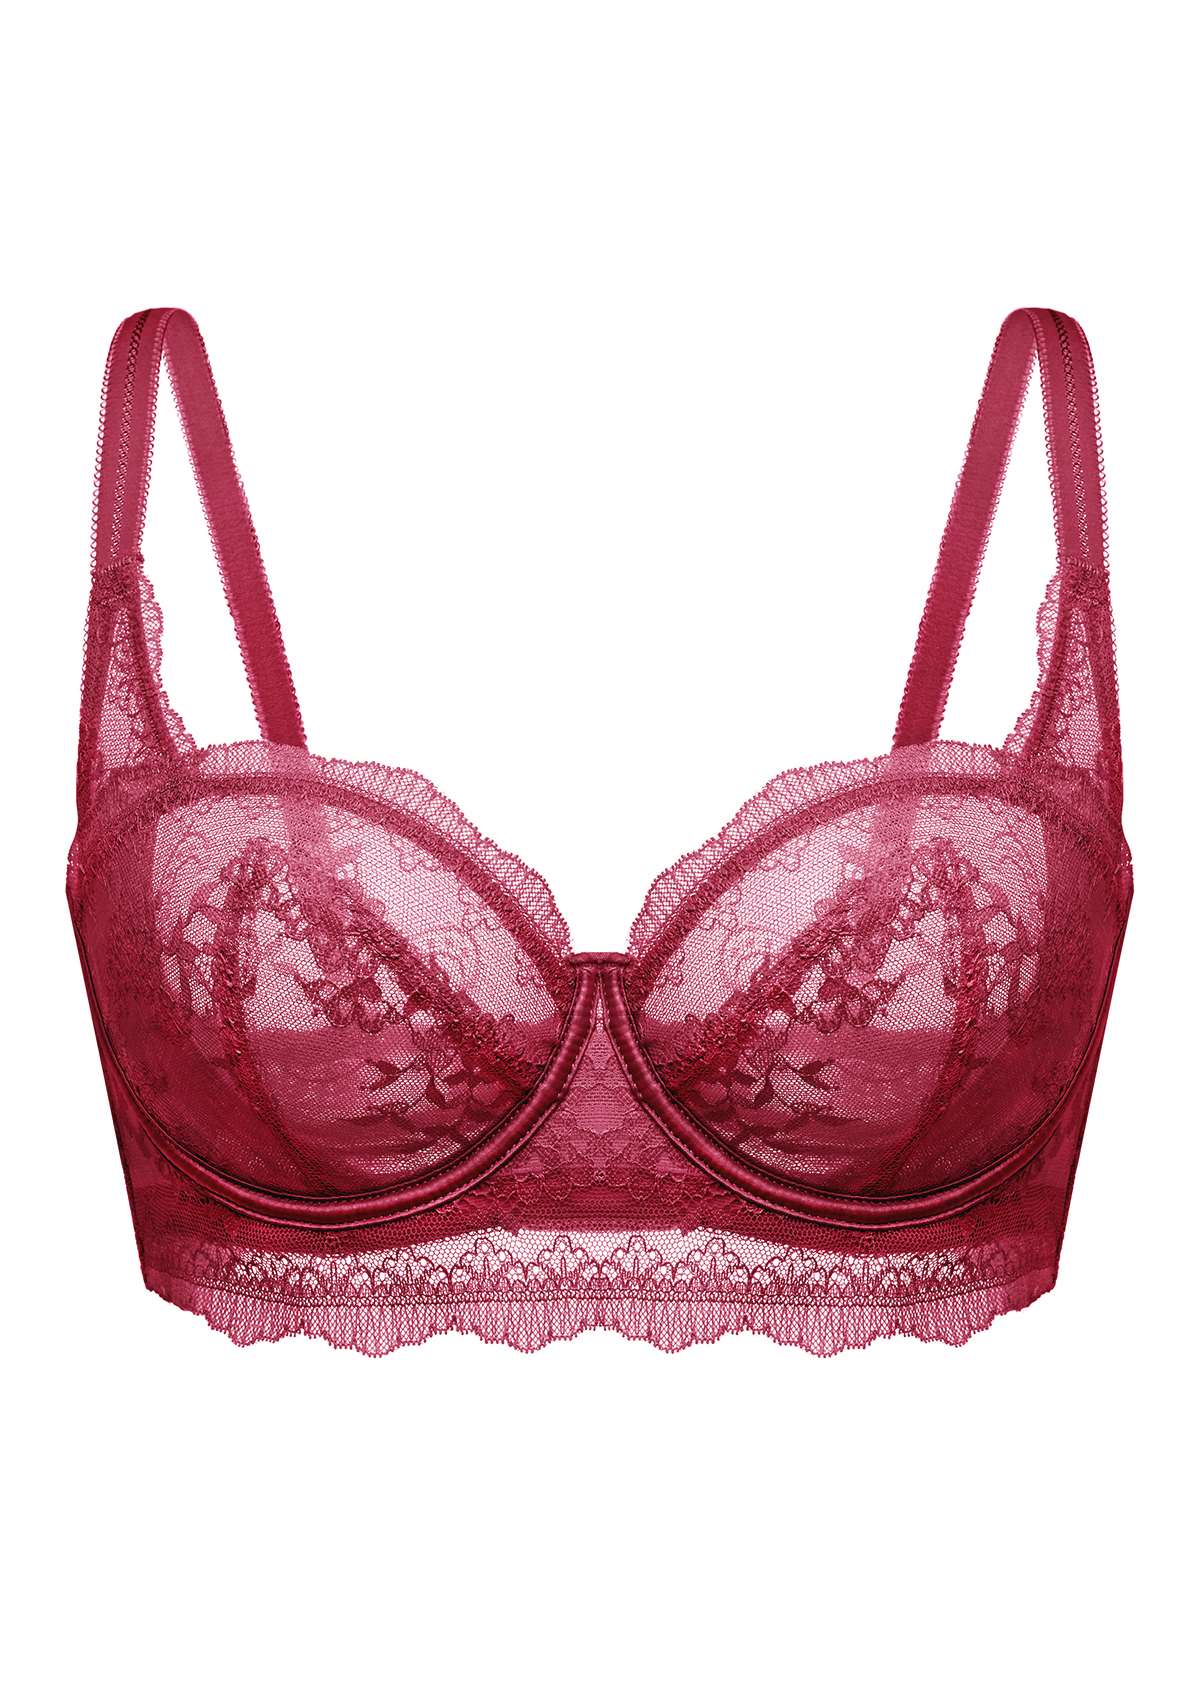 HSIA Floral Lace Unlined Bridal Balconette Bra Set - Supportive Classic - Burgundy / 40 / DDD/F